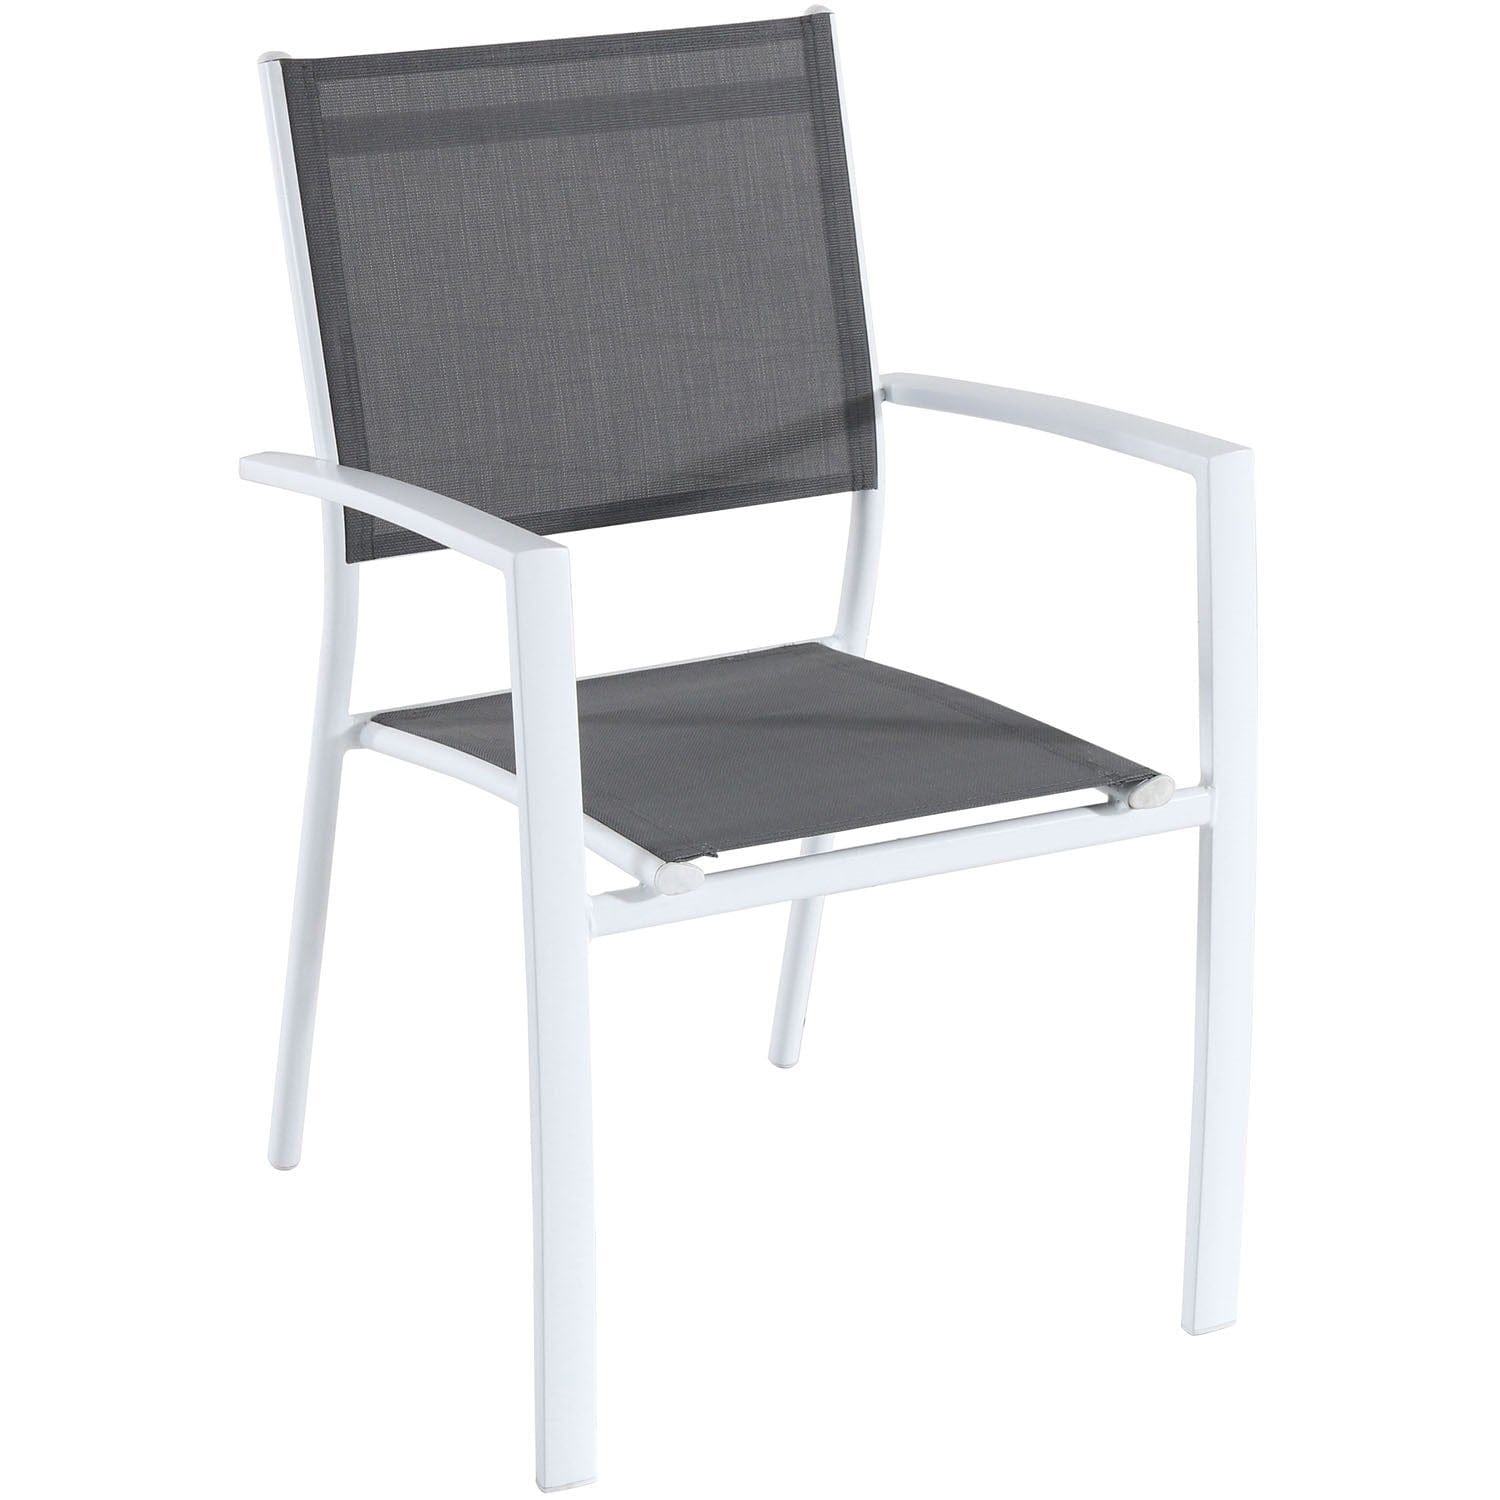 Hanover Outdoor Dining Set Hanover- Del Mar 7 Piece Outdoor Dining Set with 6 Sling Chairs in Gray/White and a 40" x 118" Expandable Dining Table | DELDN7PC-WW